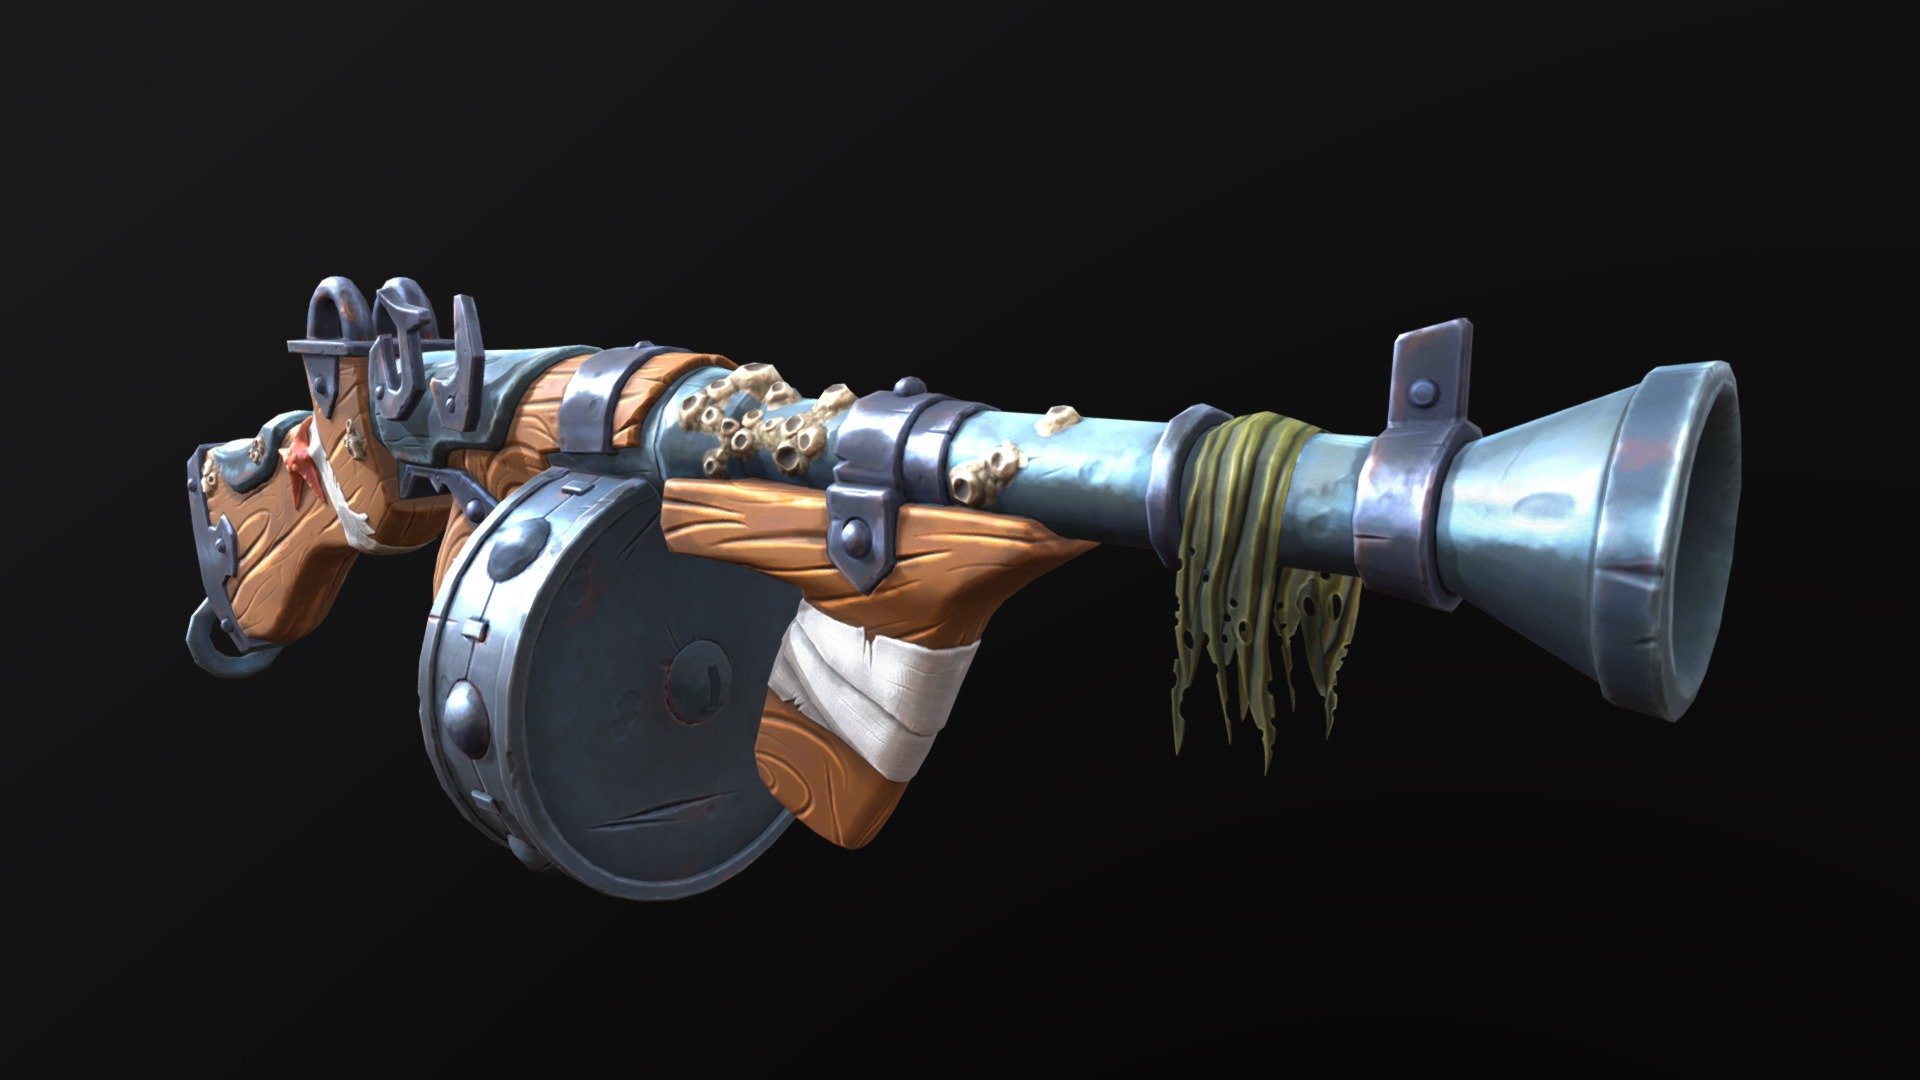 A stylized Thompson assault rifle made according to the concept 3d model